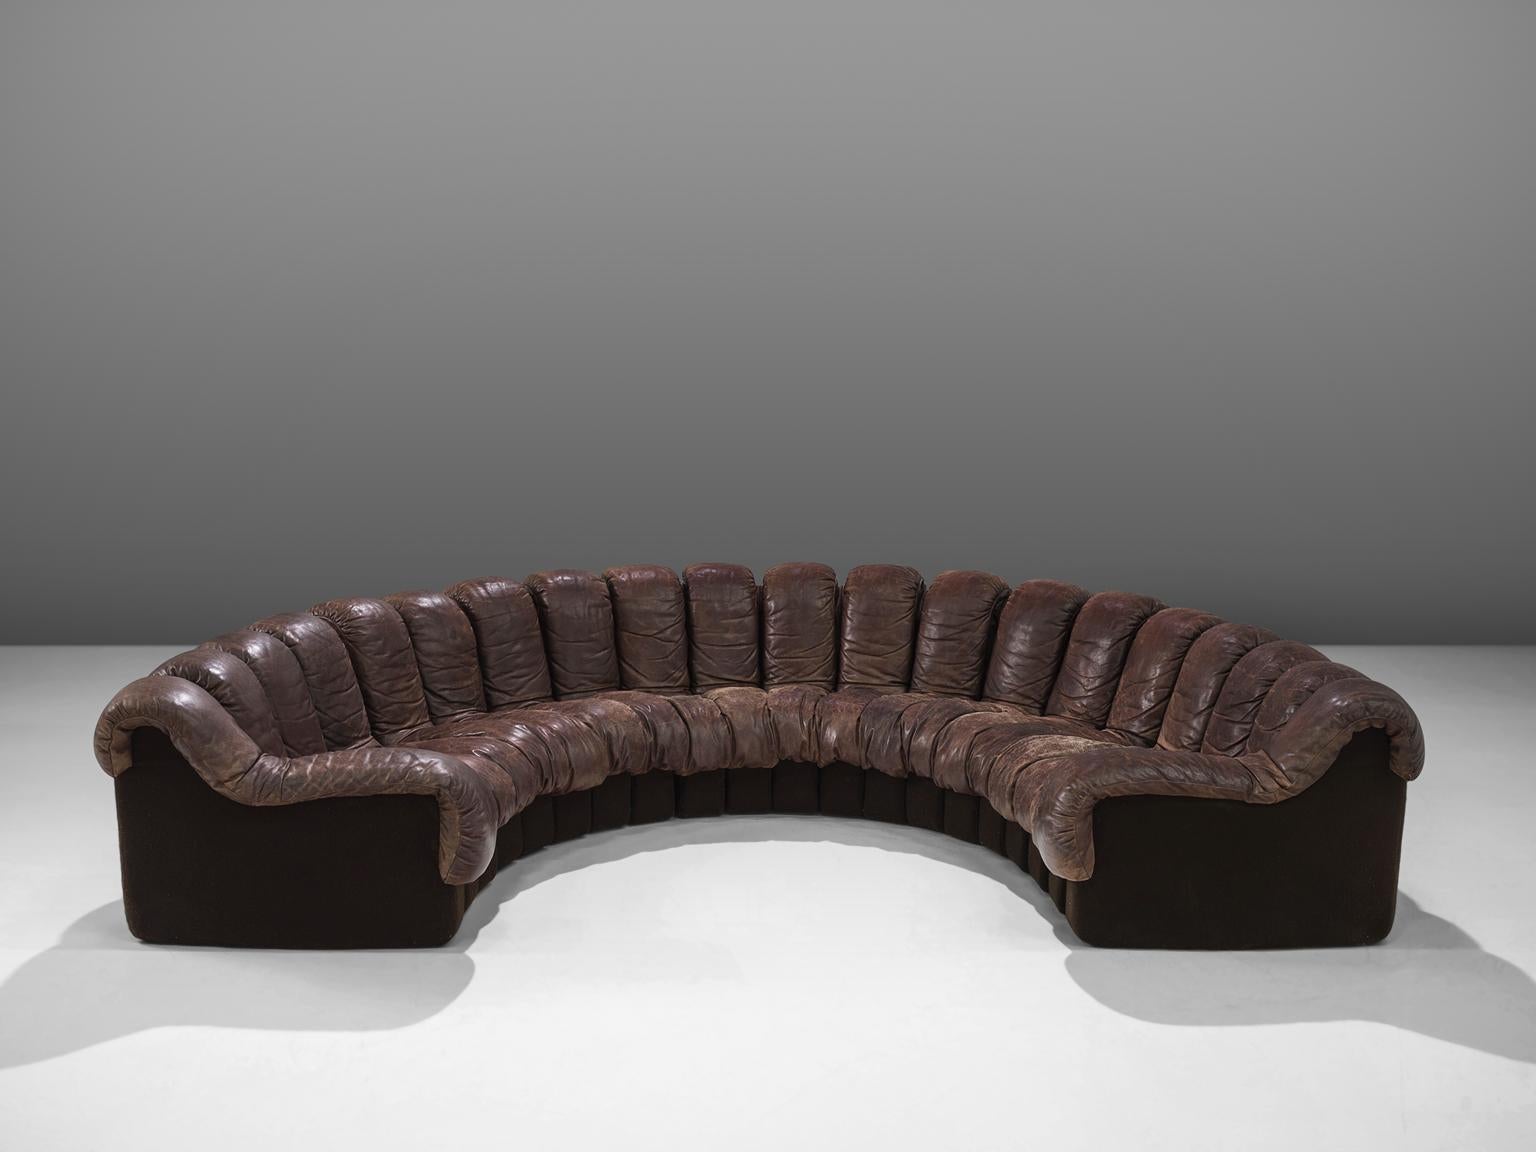 De Sede ‘Snake’ DS-600, in dark brown leather, Switzerland, 1972. 

De Sede 'Non Stop' sectional sofa containing 20 pieces in original dark brown leather, of which 18 center pieces and two higher armrests. Any number of pieces can be zipped